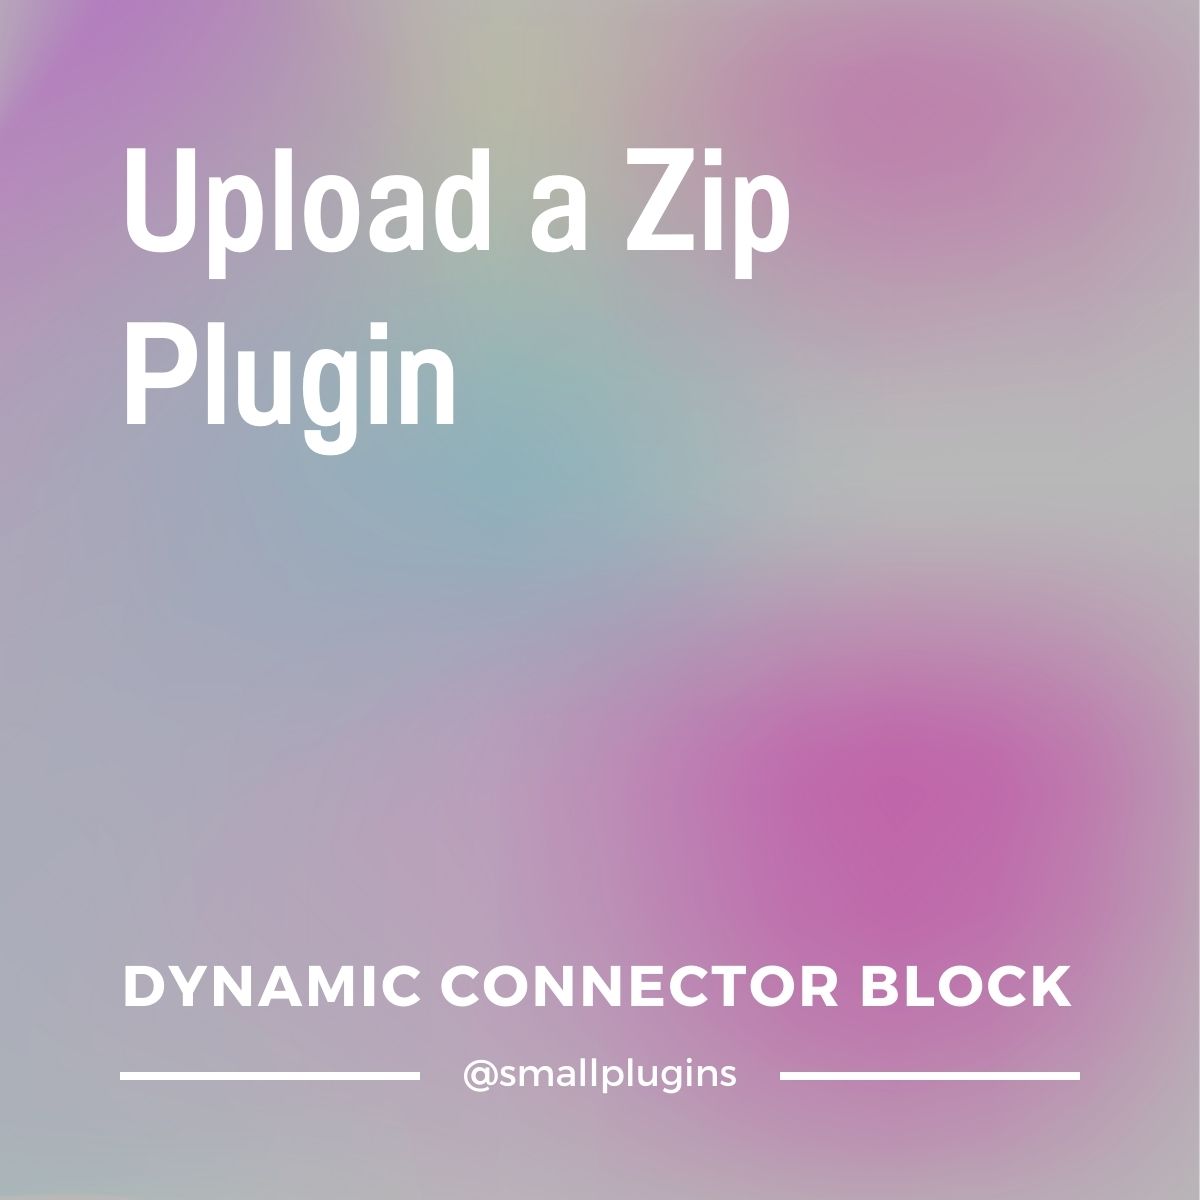 How to upload a plugin in zip format to your site